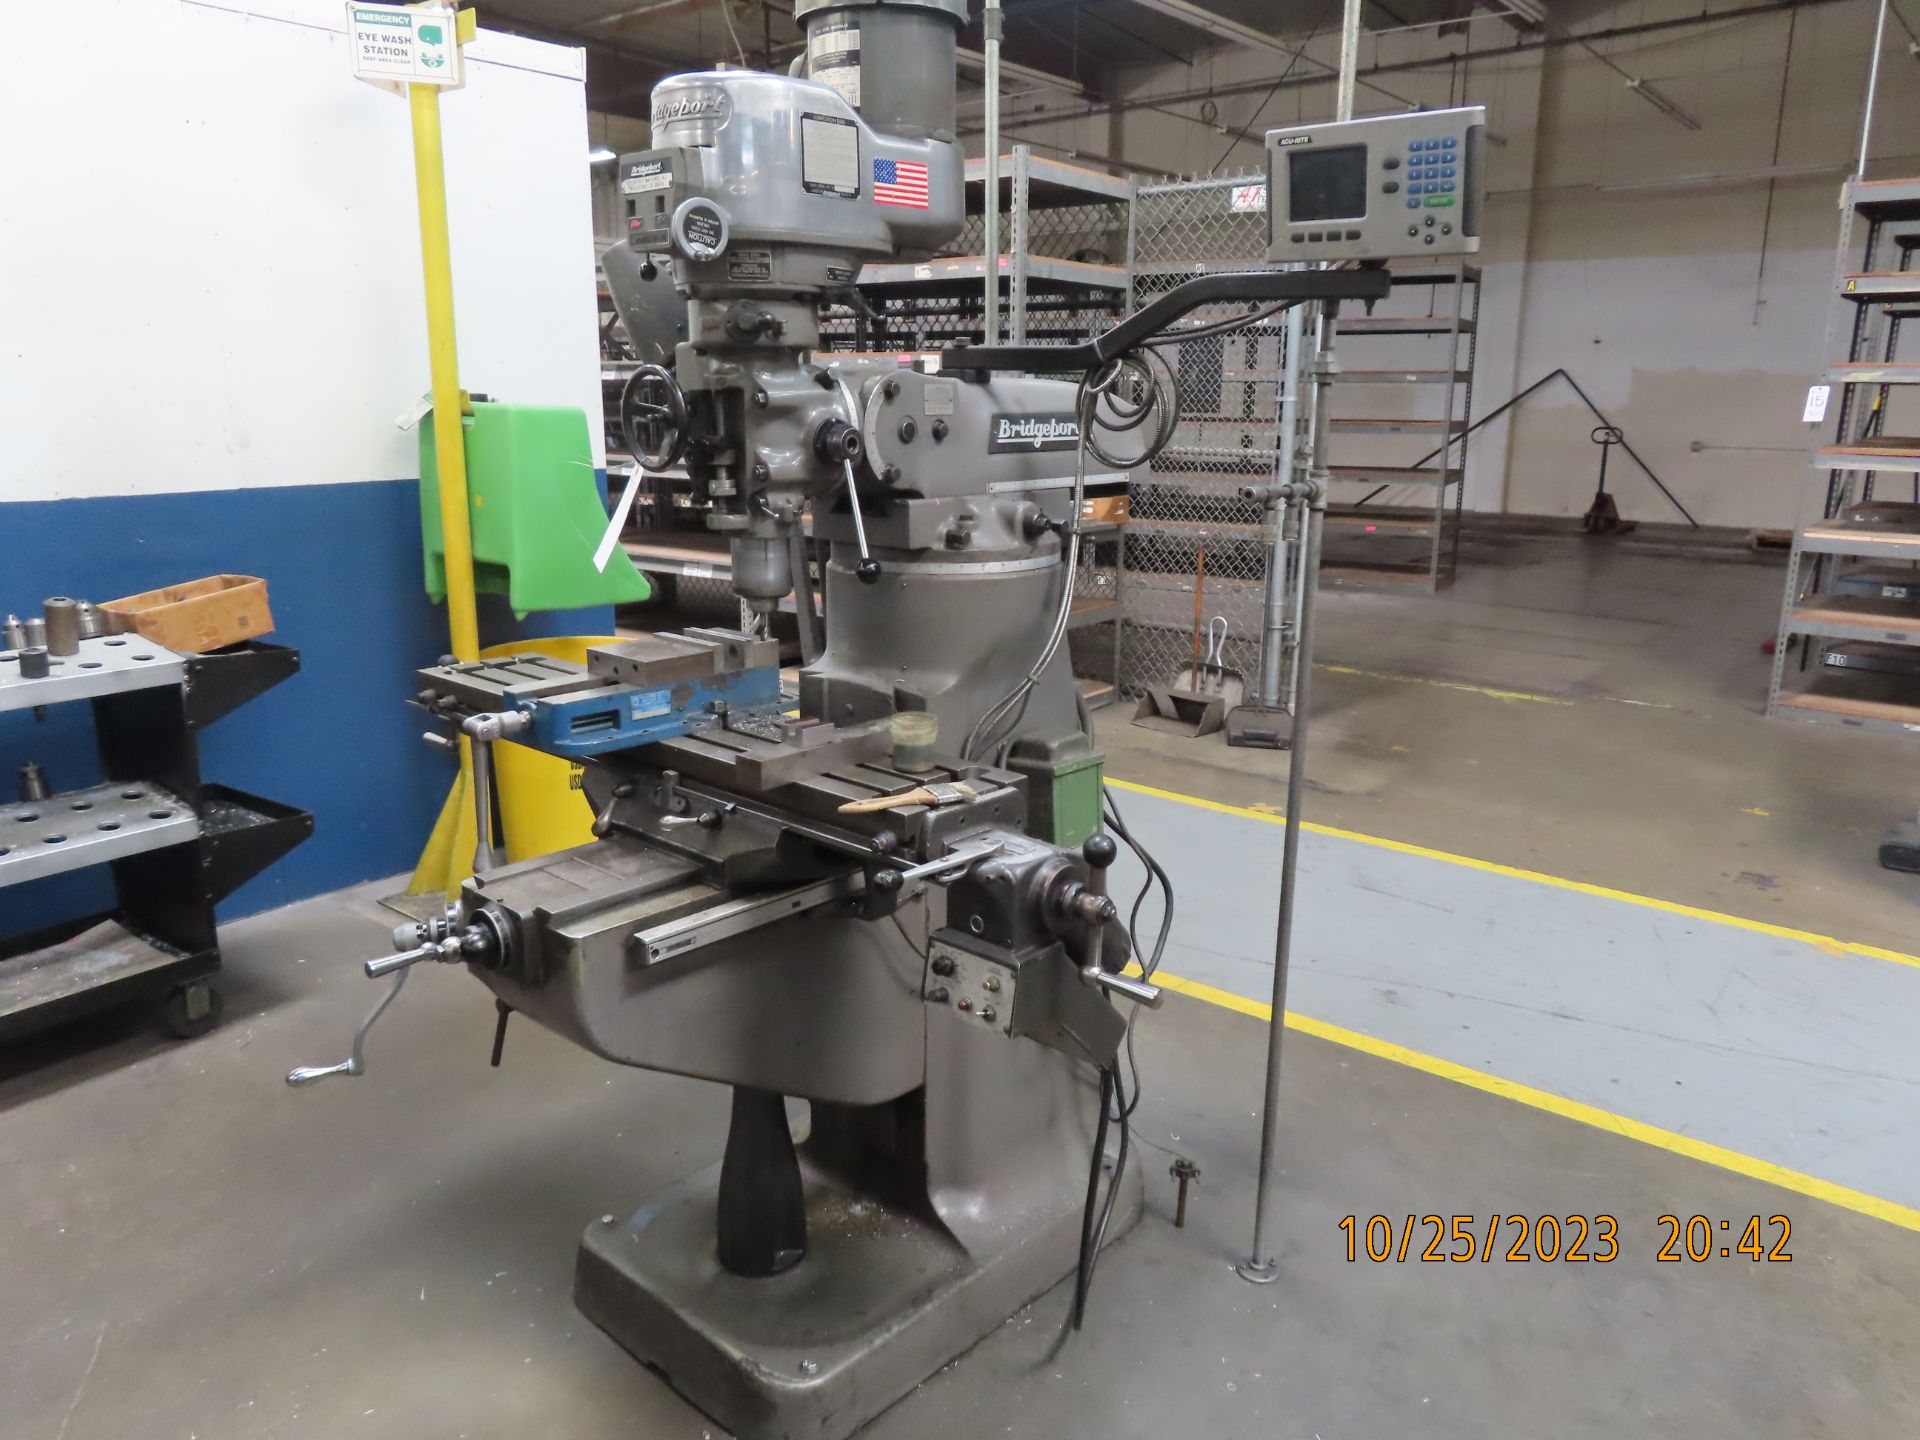 Bridgeport Vertical Mill, 9'' x 48'' Table w/ Power Feed, Var Spd, w/ Acu-Rite DROs (No Mill Vise) - Image 2 of 4